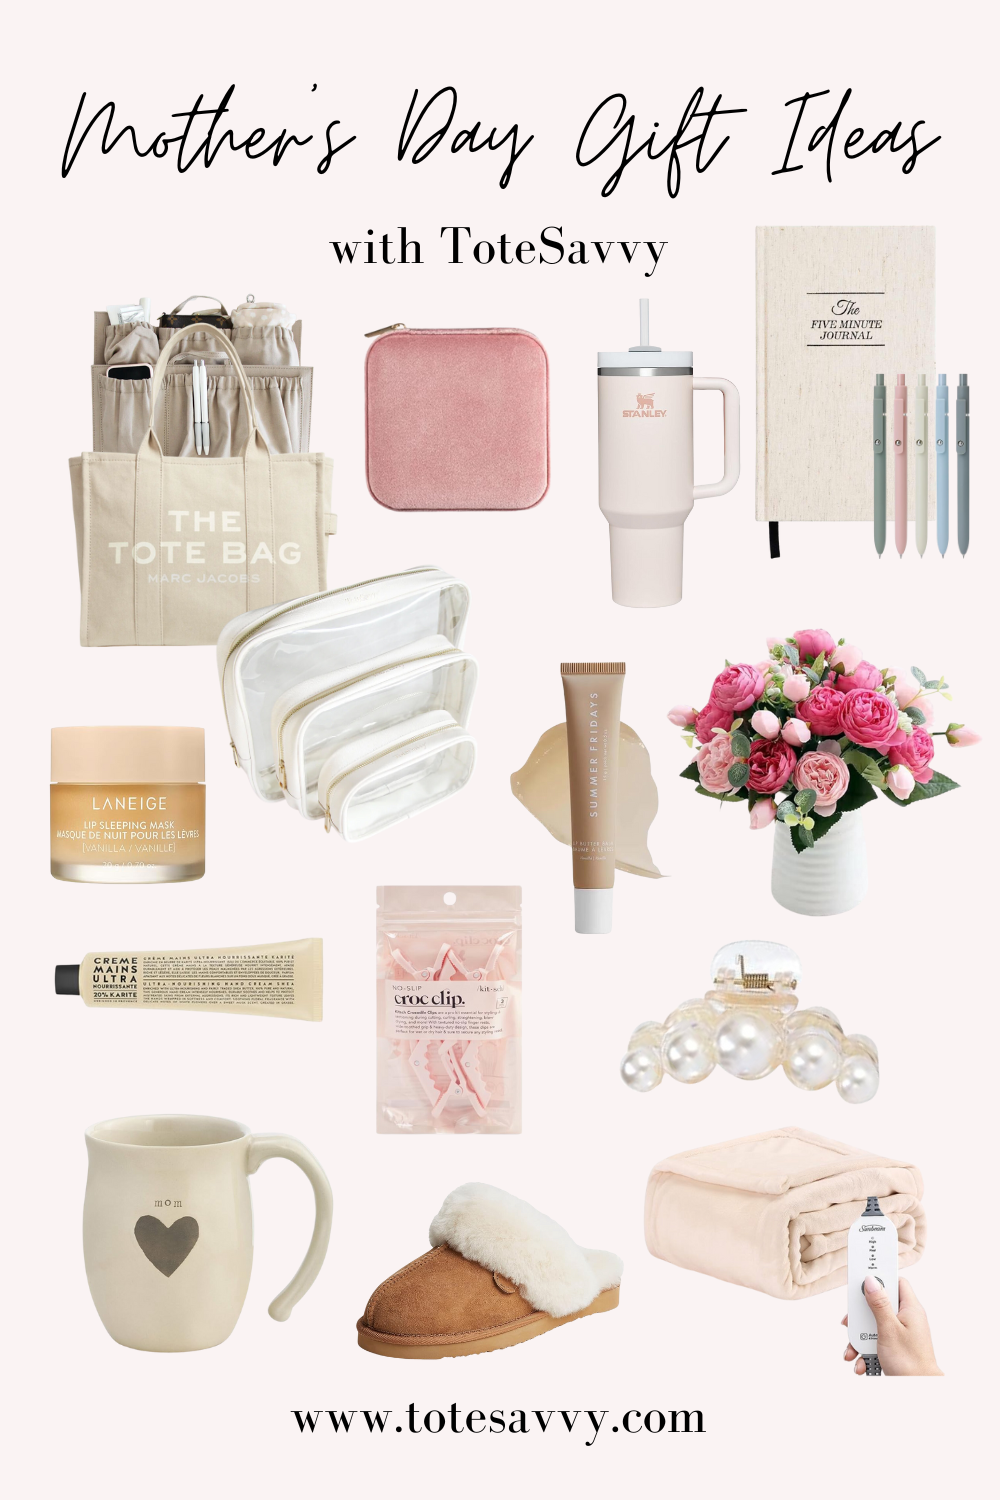 Mother's Day Gift Ideas with ToteSavvy